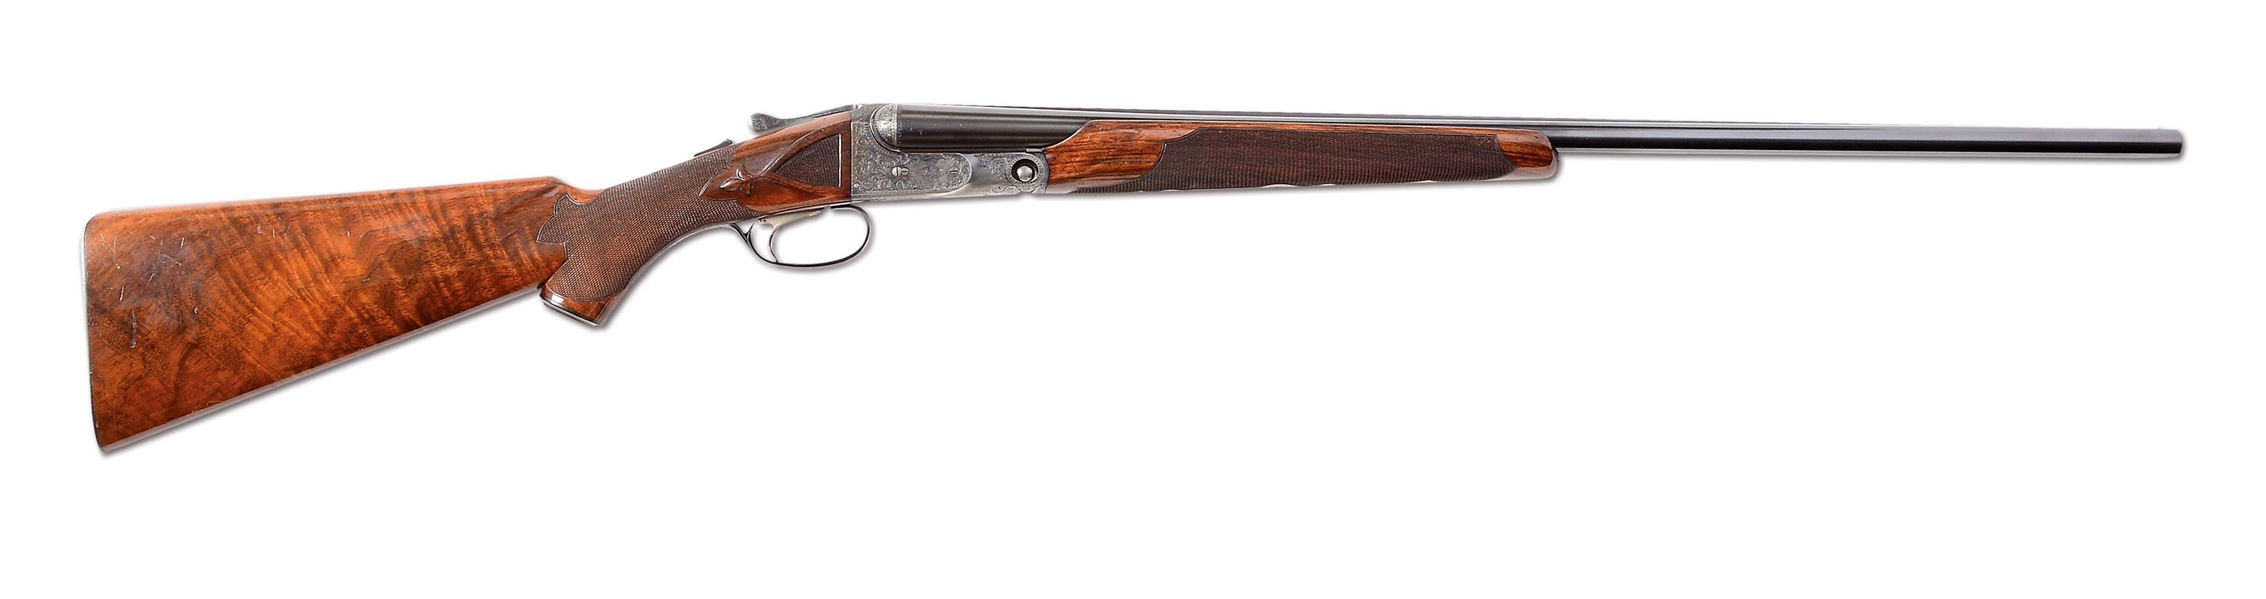 (C) TRULY SUPERB AND RARE 20 GAUGE PARKER BHE  SHOTGUN WITH BEAVERTAIL FOREND AND SINGLE TRIGGER (1936).